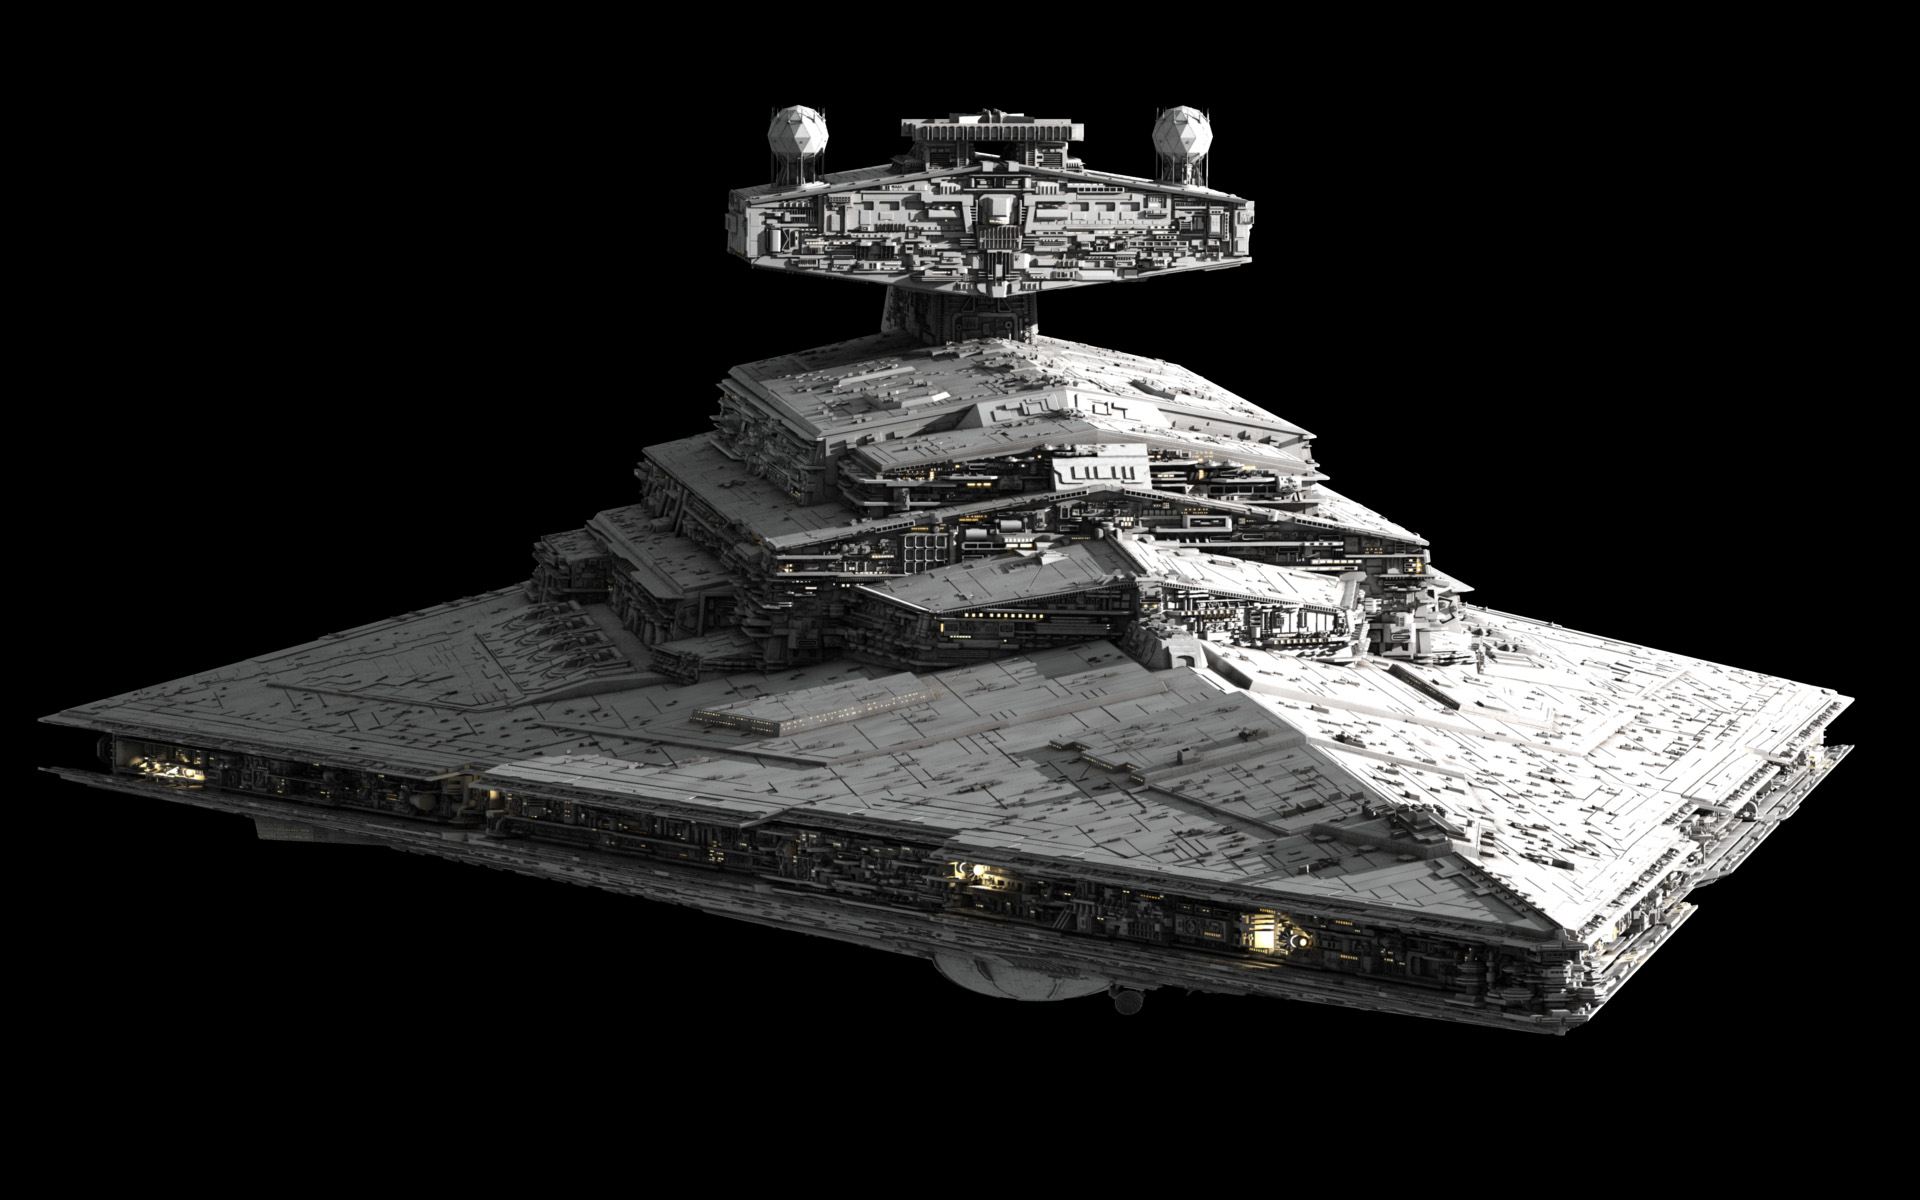 Imperial Star Destroyer built by Ansel Hsiao Fractalsponge